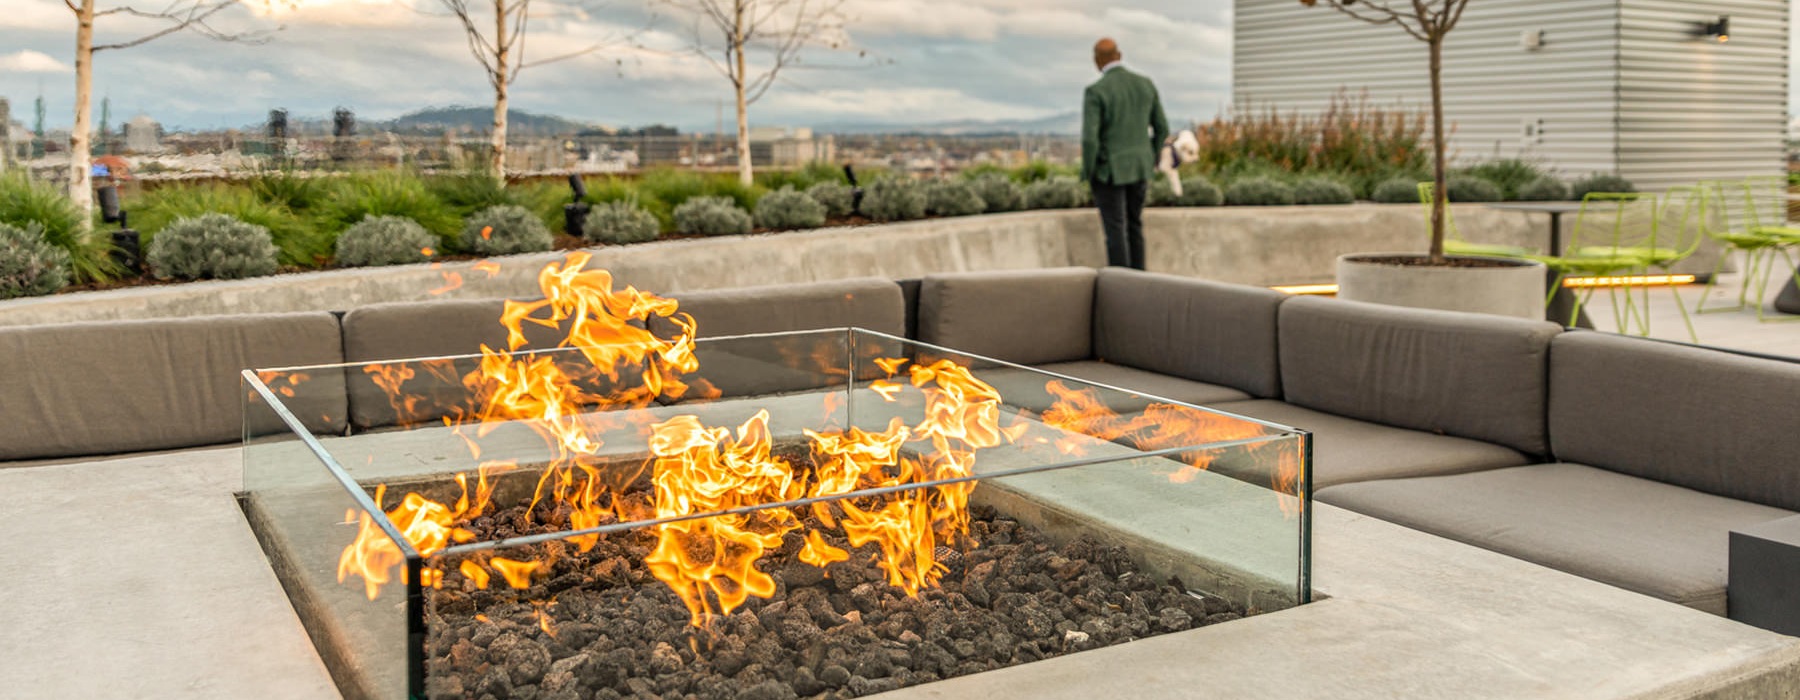 Large rooftop firepit with a view of the city